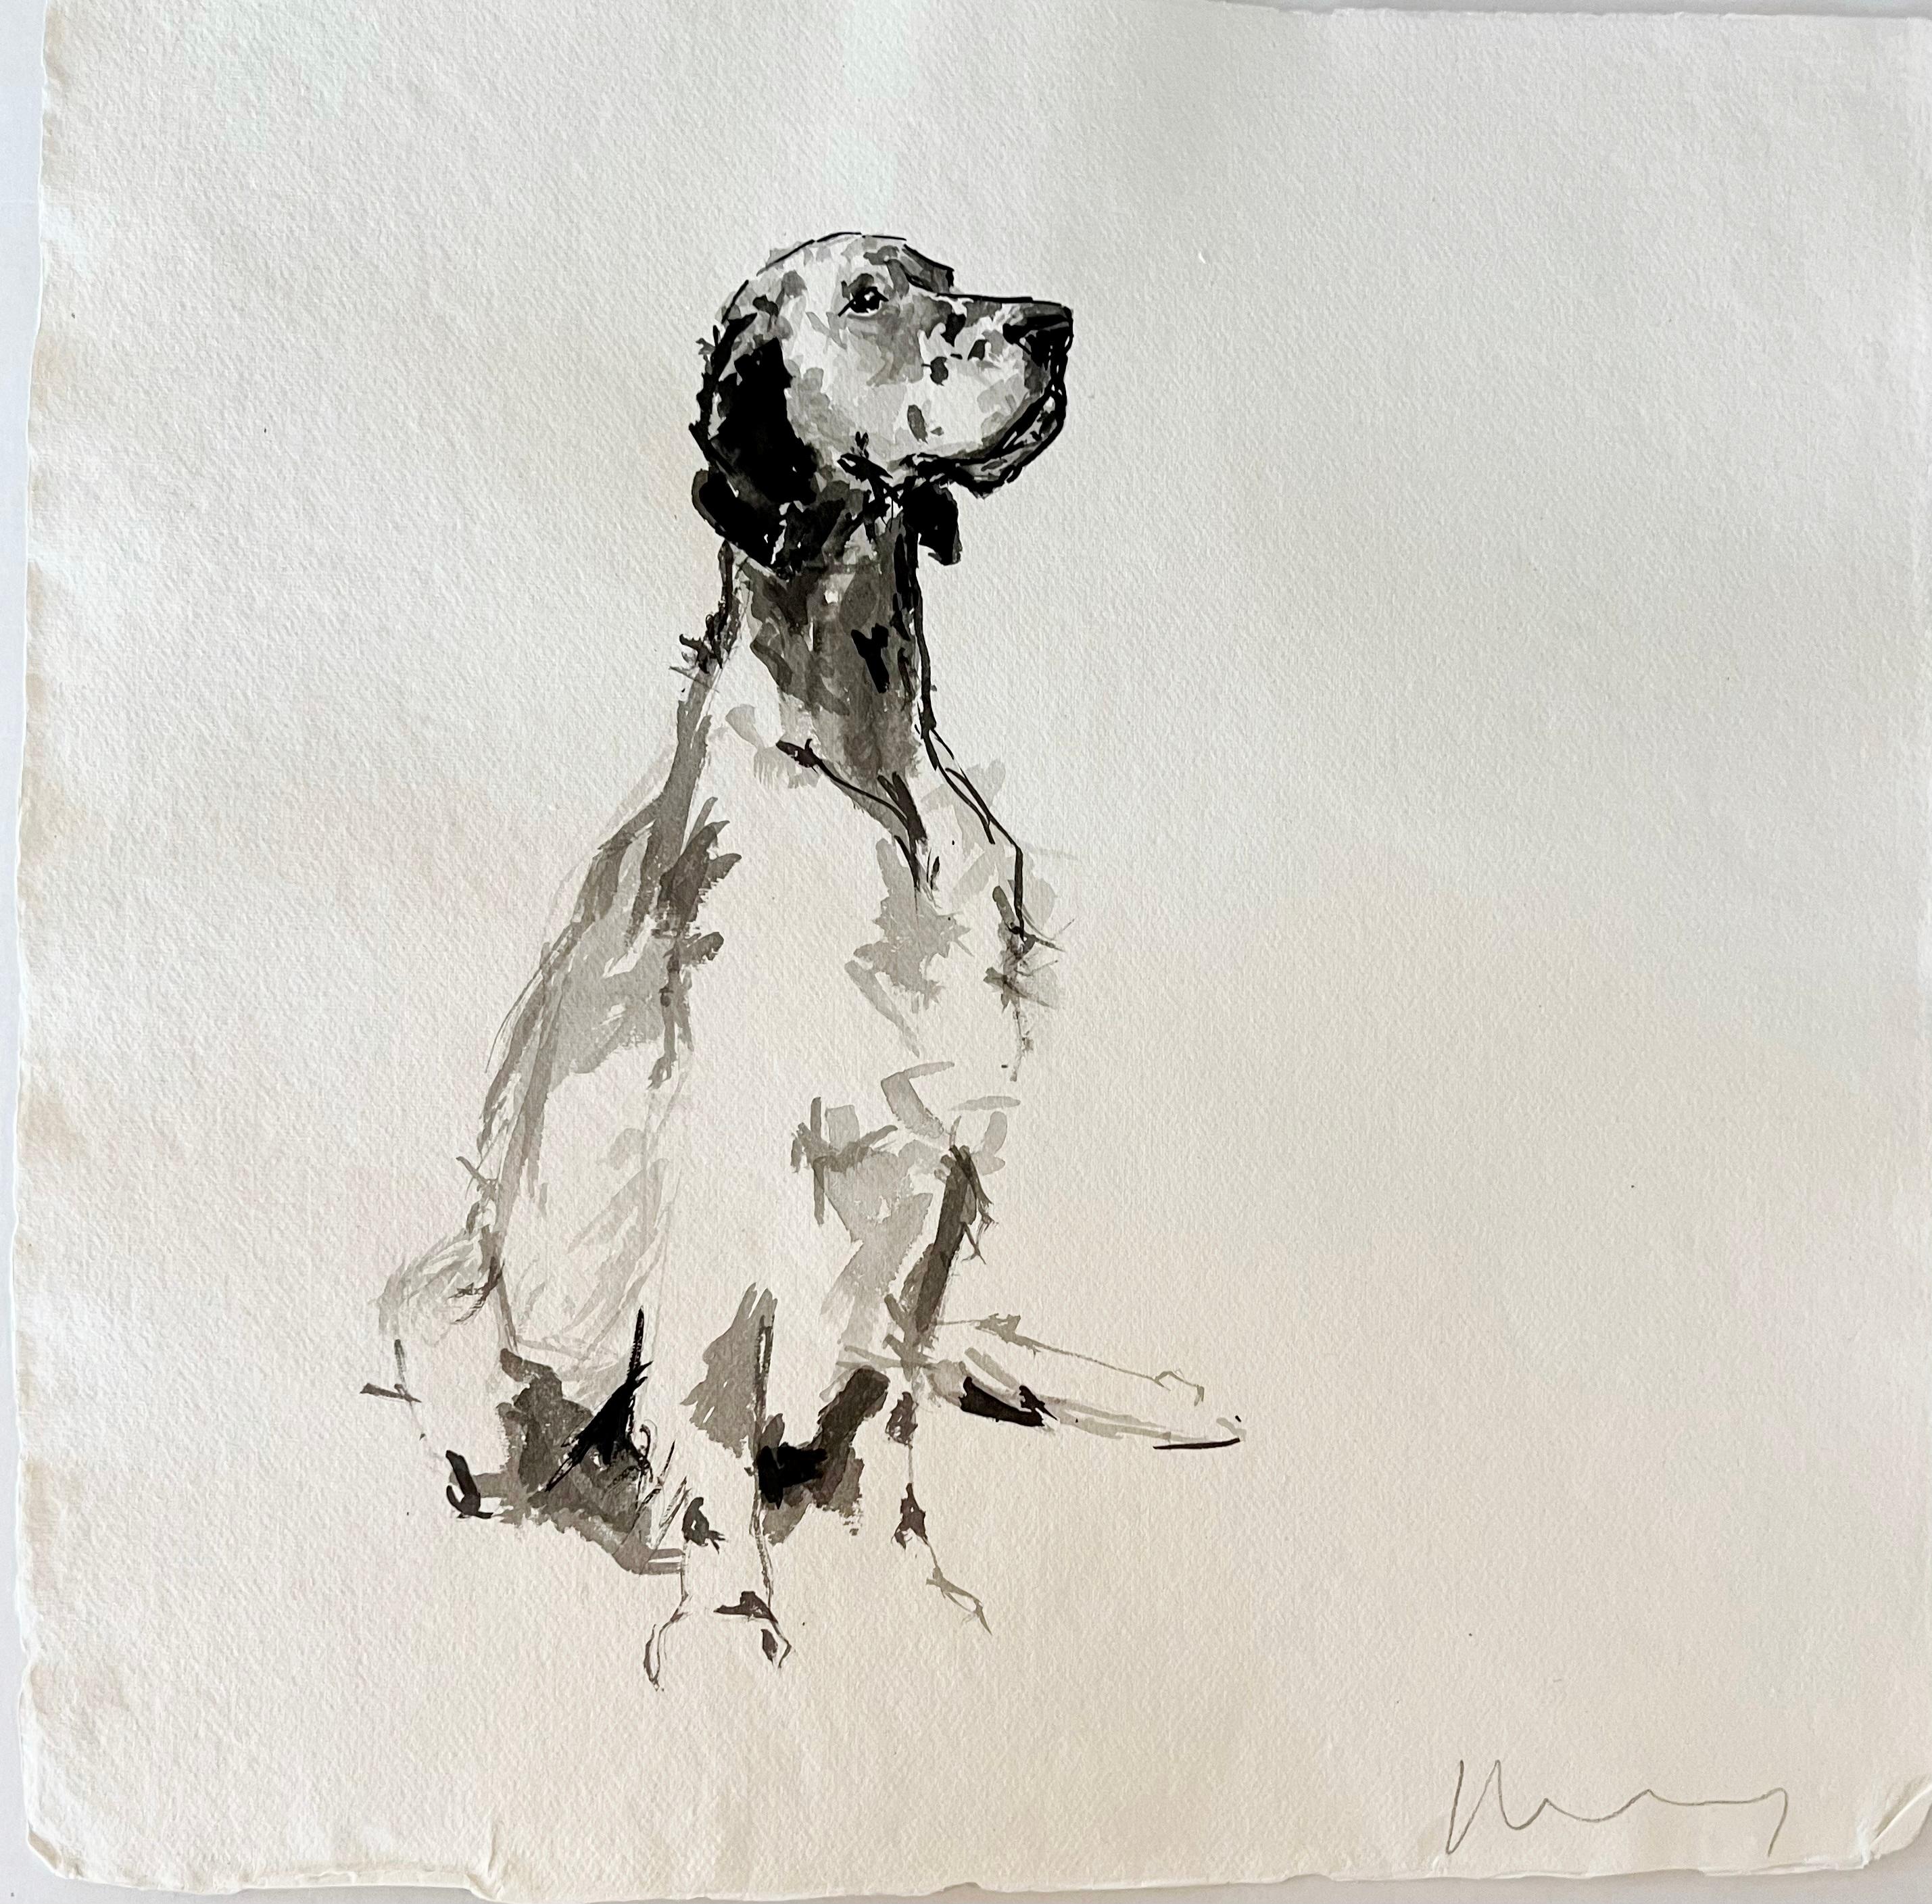 English Setter minimal black and white ink painting on rag paper